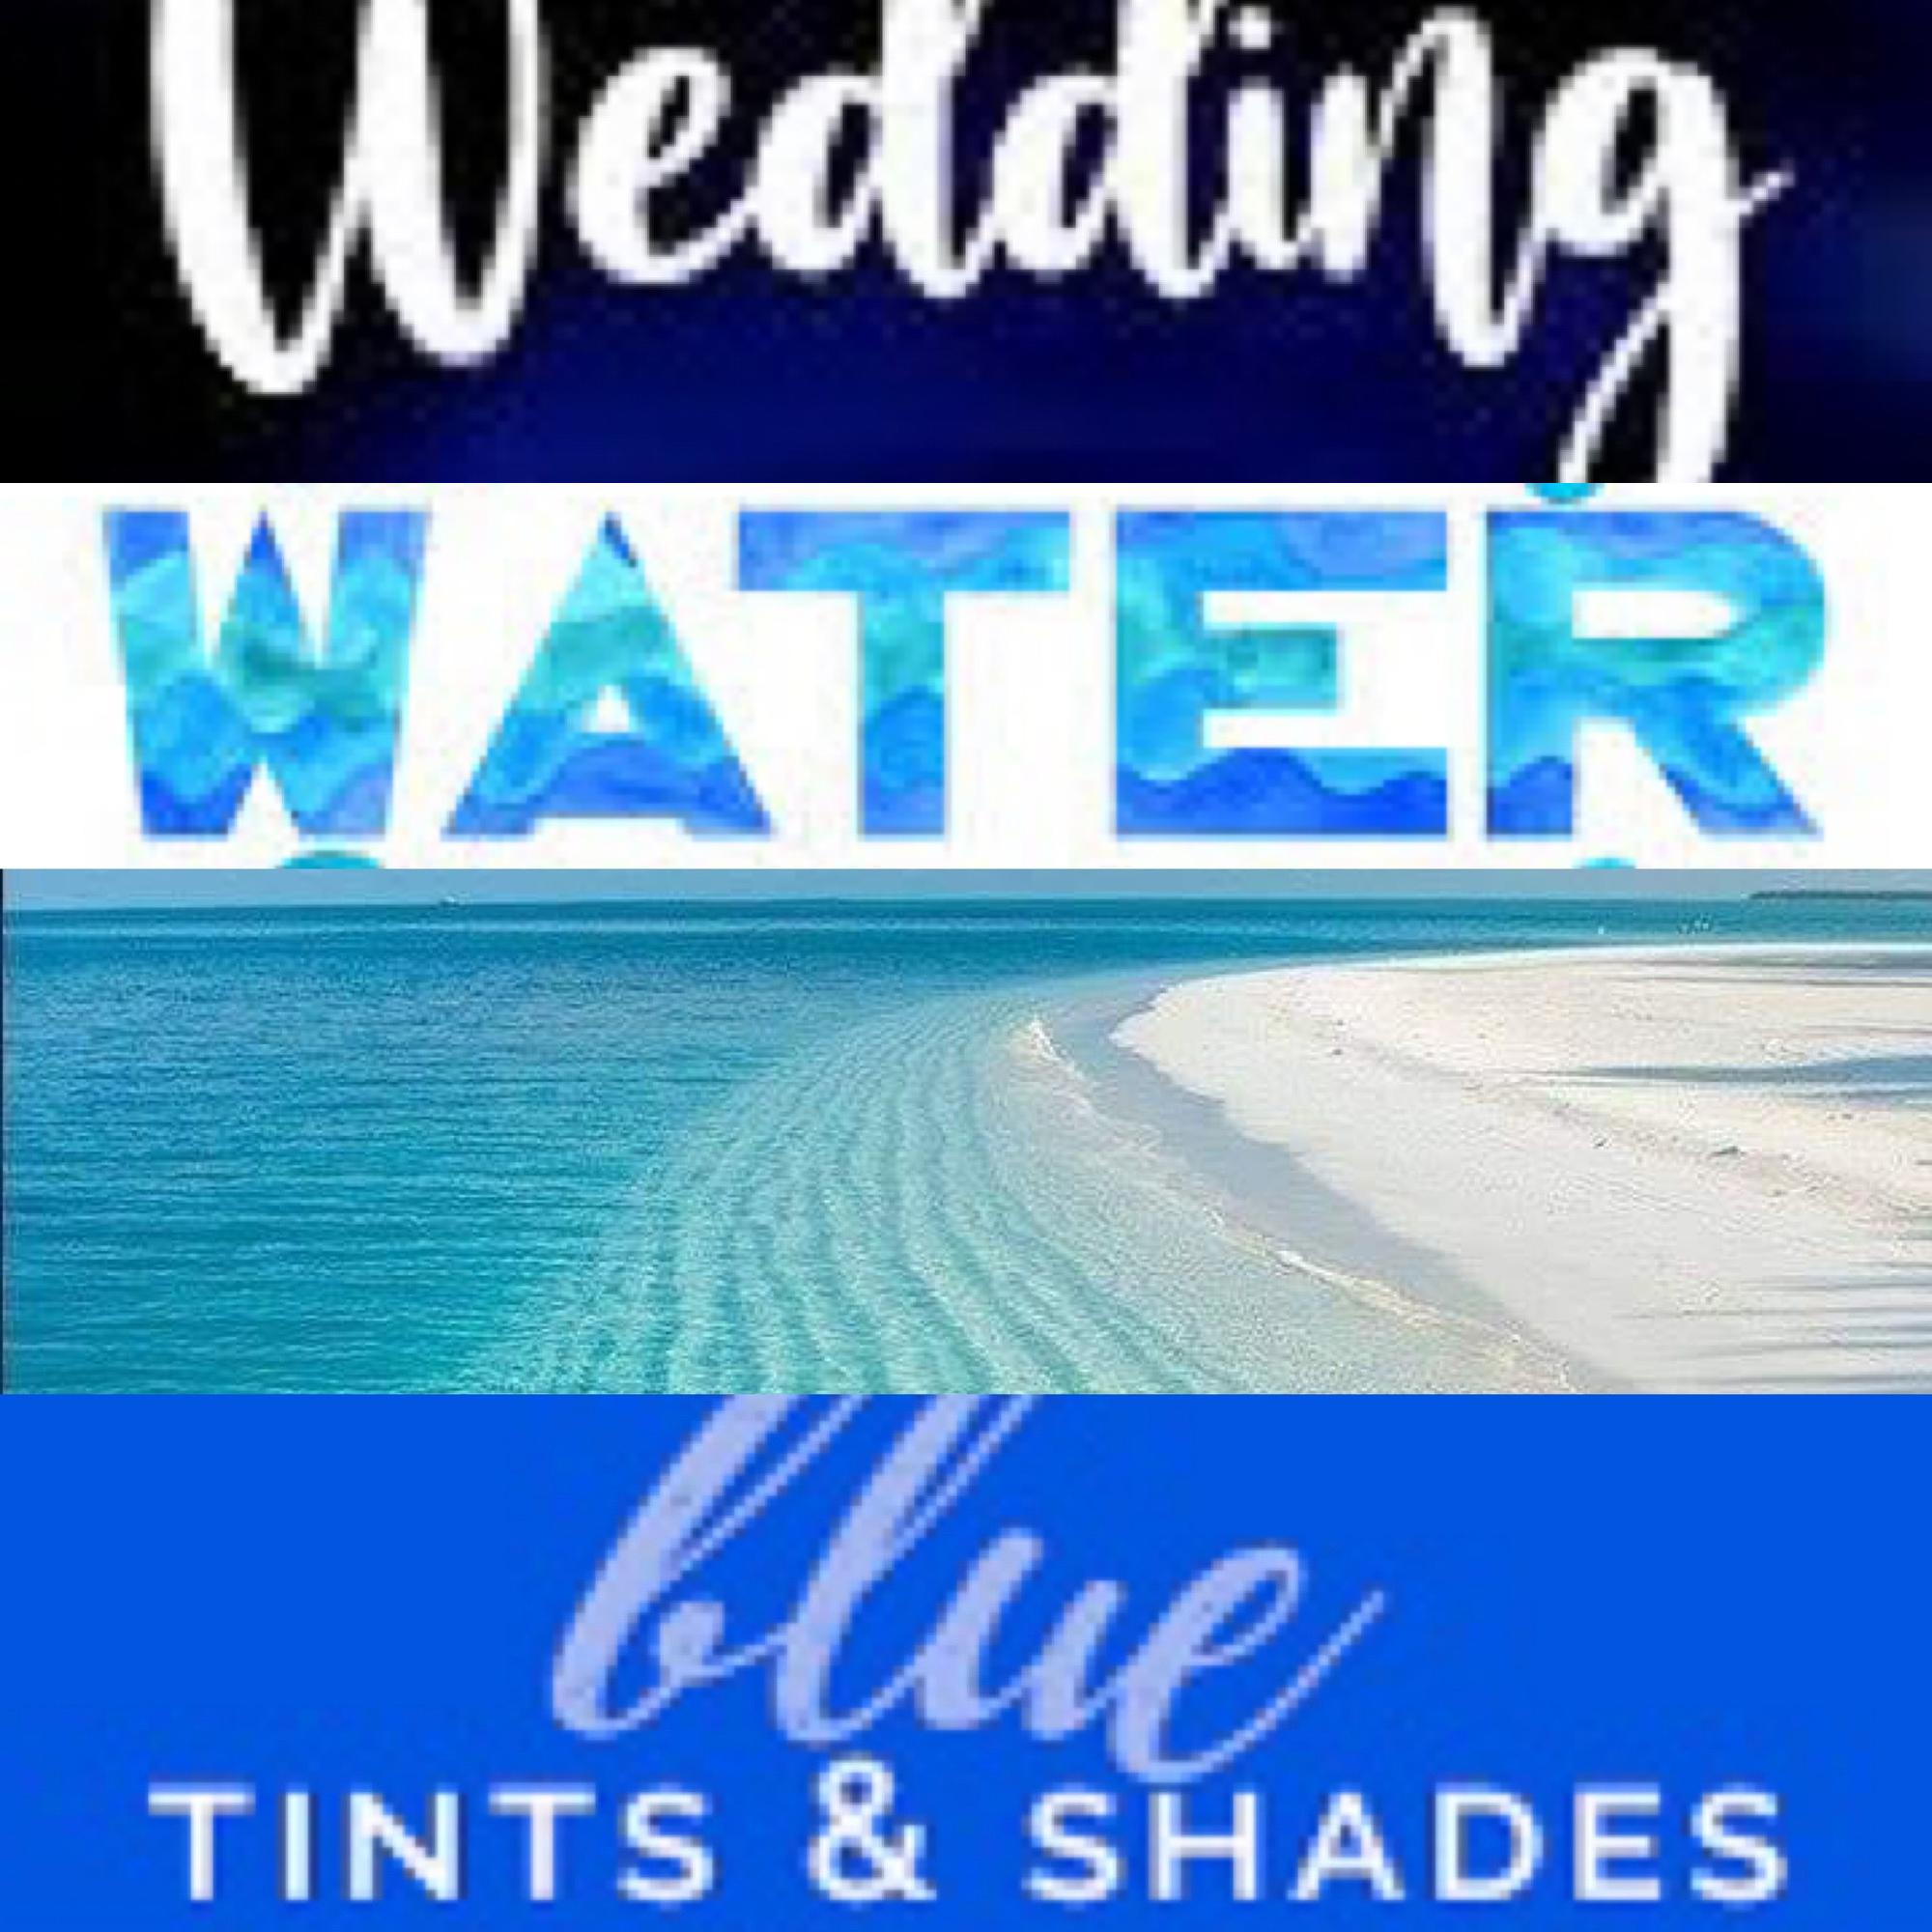 Our wedding color…all shades of water blue!